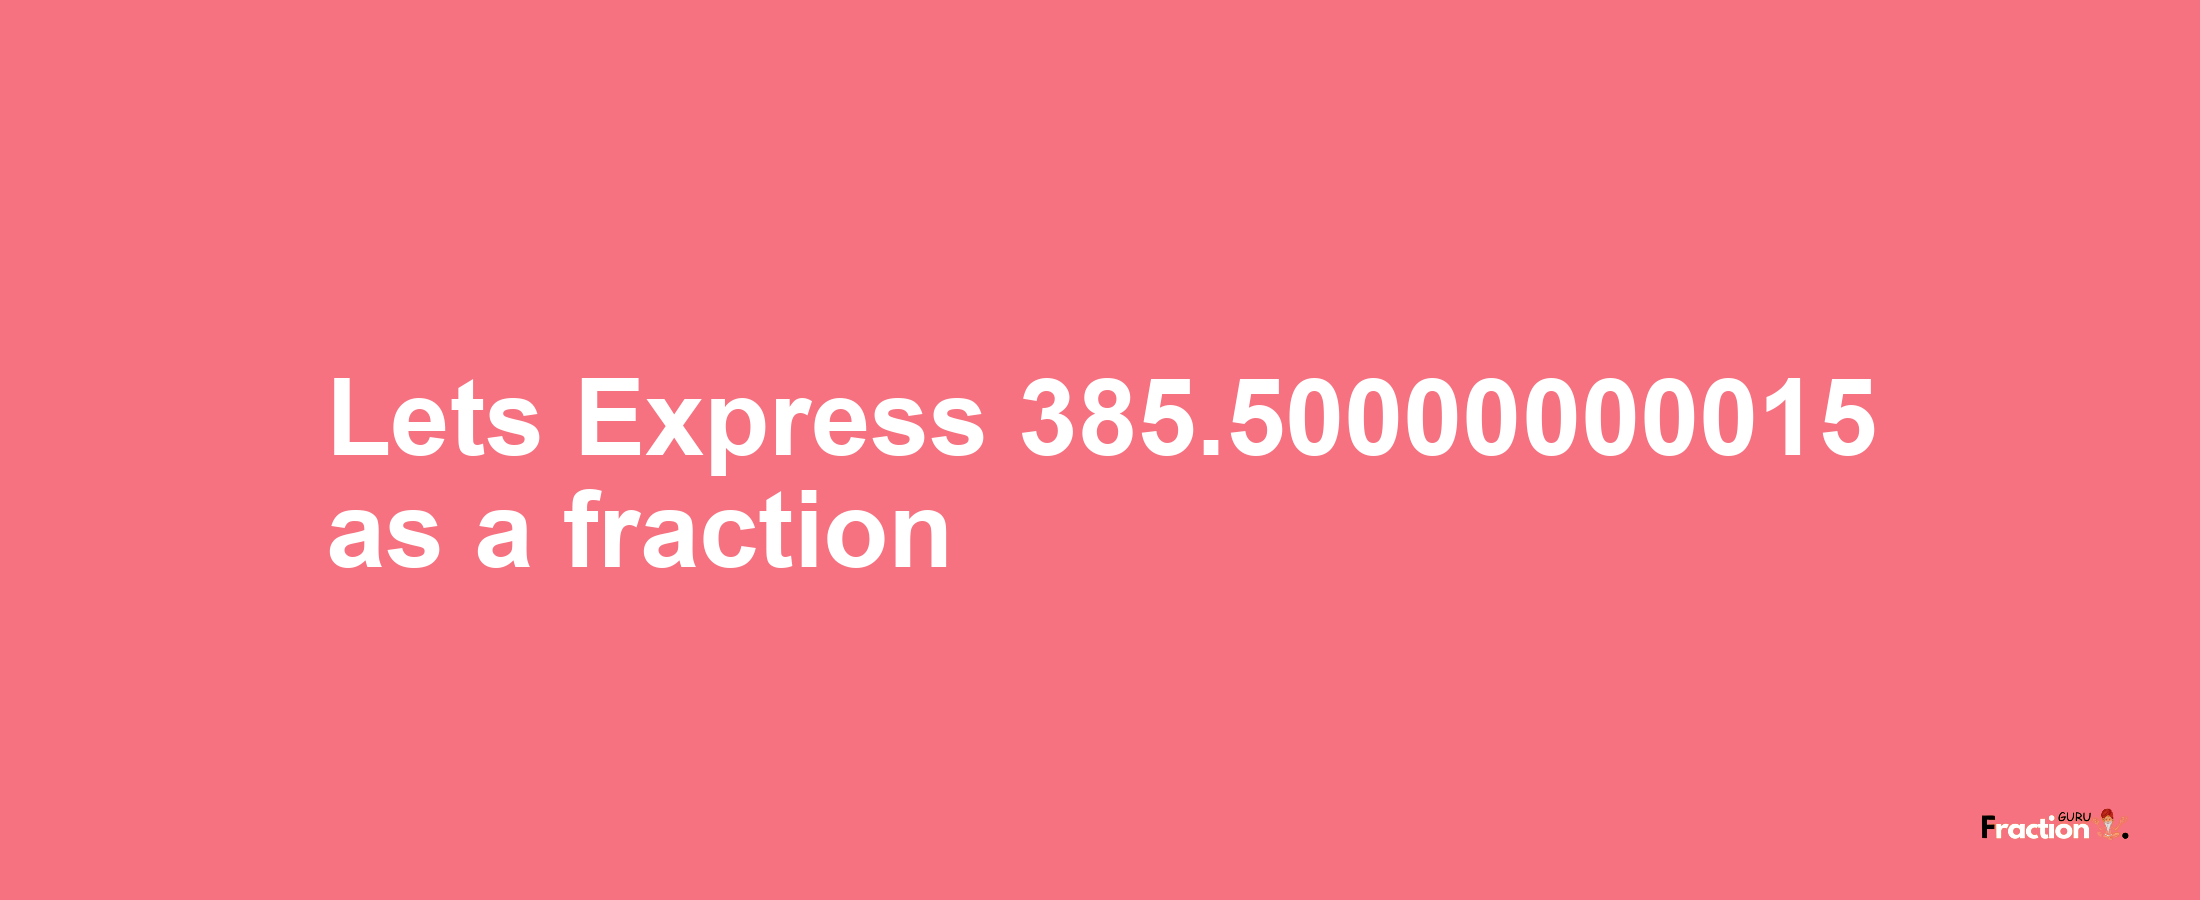 Lets Express 385.50000000015 as afraction